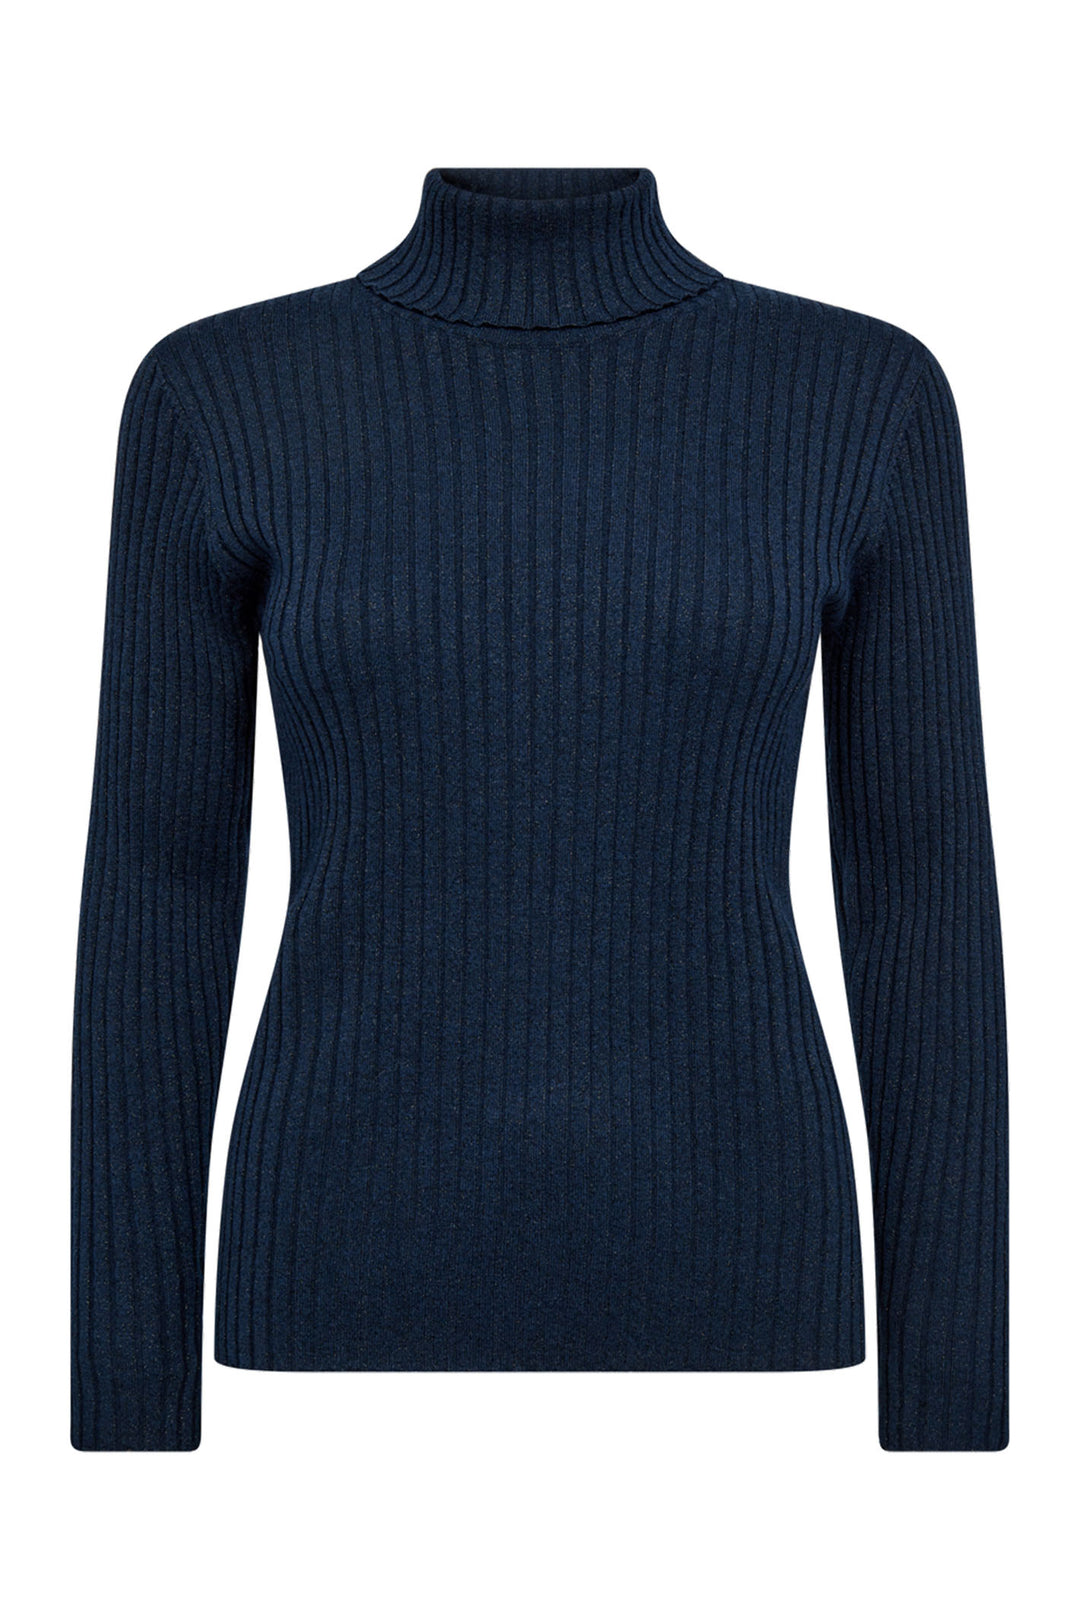 Mos Mosh 158120 MMRelena Pageant Blue Rib Lux Rollneck Jumper - Dotique Chesterfield